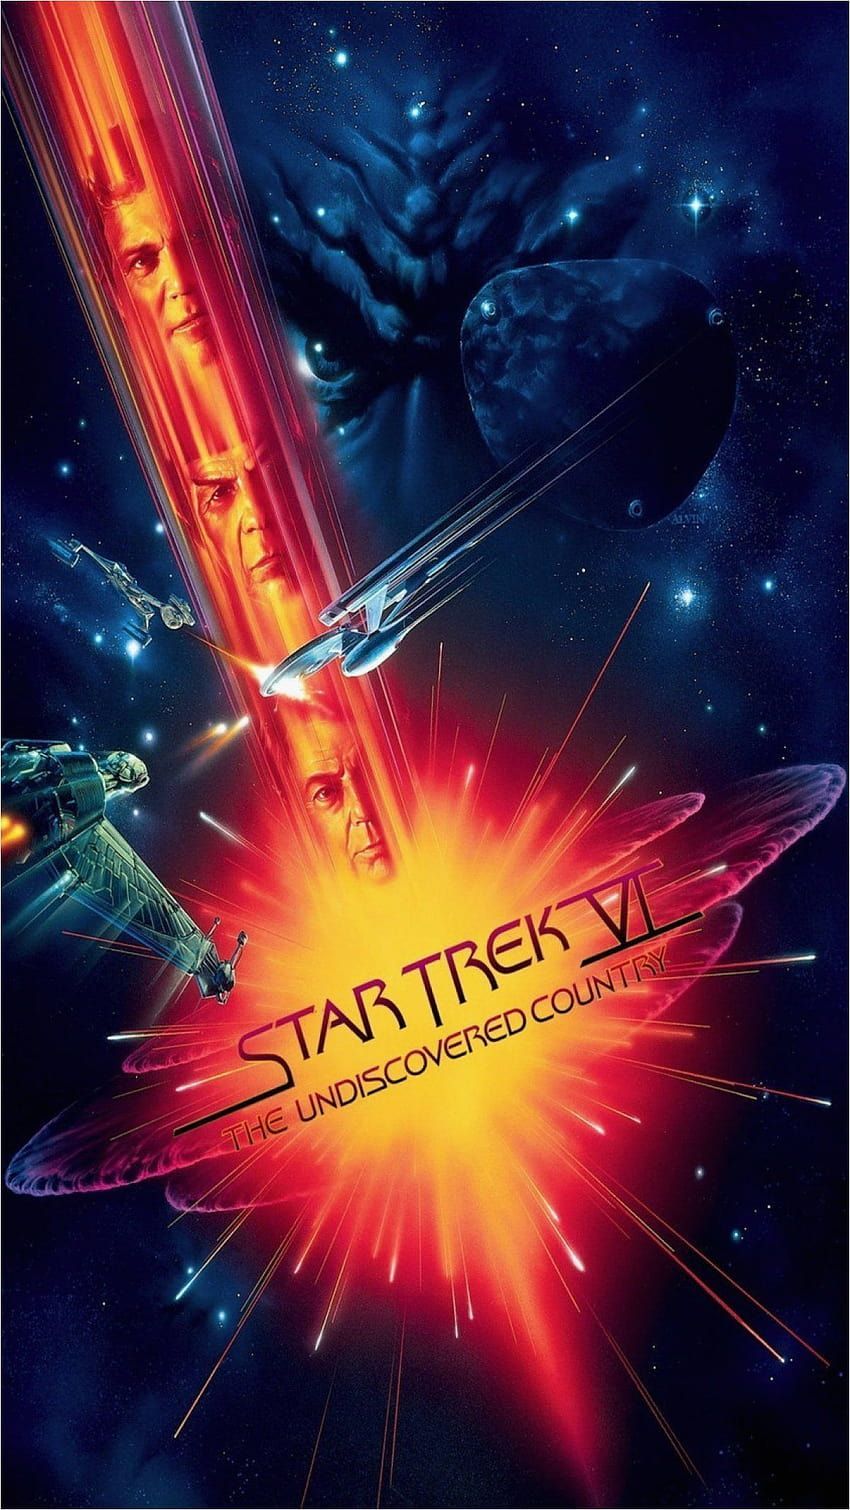 Star Trek VI: The Undiscovered Country poster featuring a spaceship flying through space with a planet in the background. - Star Trek